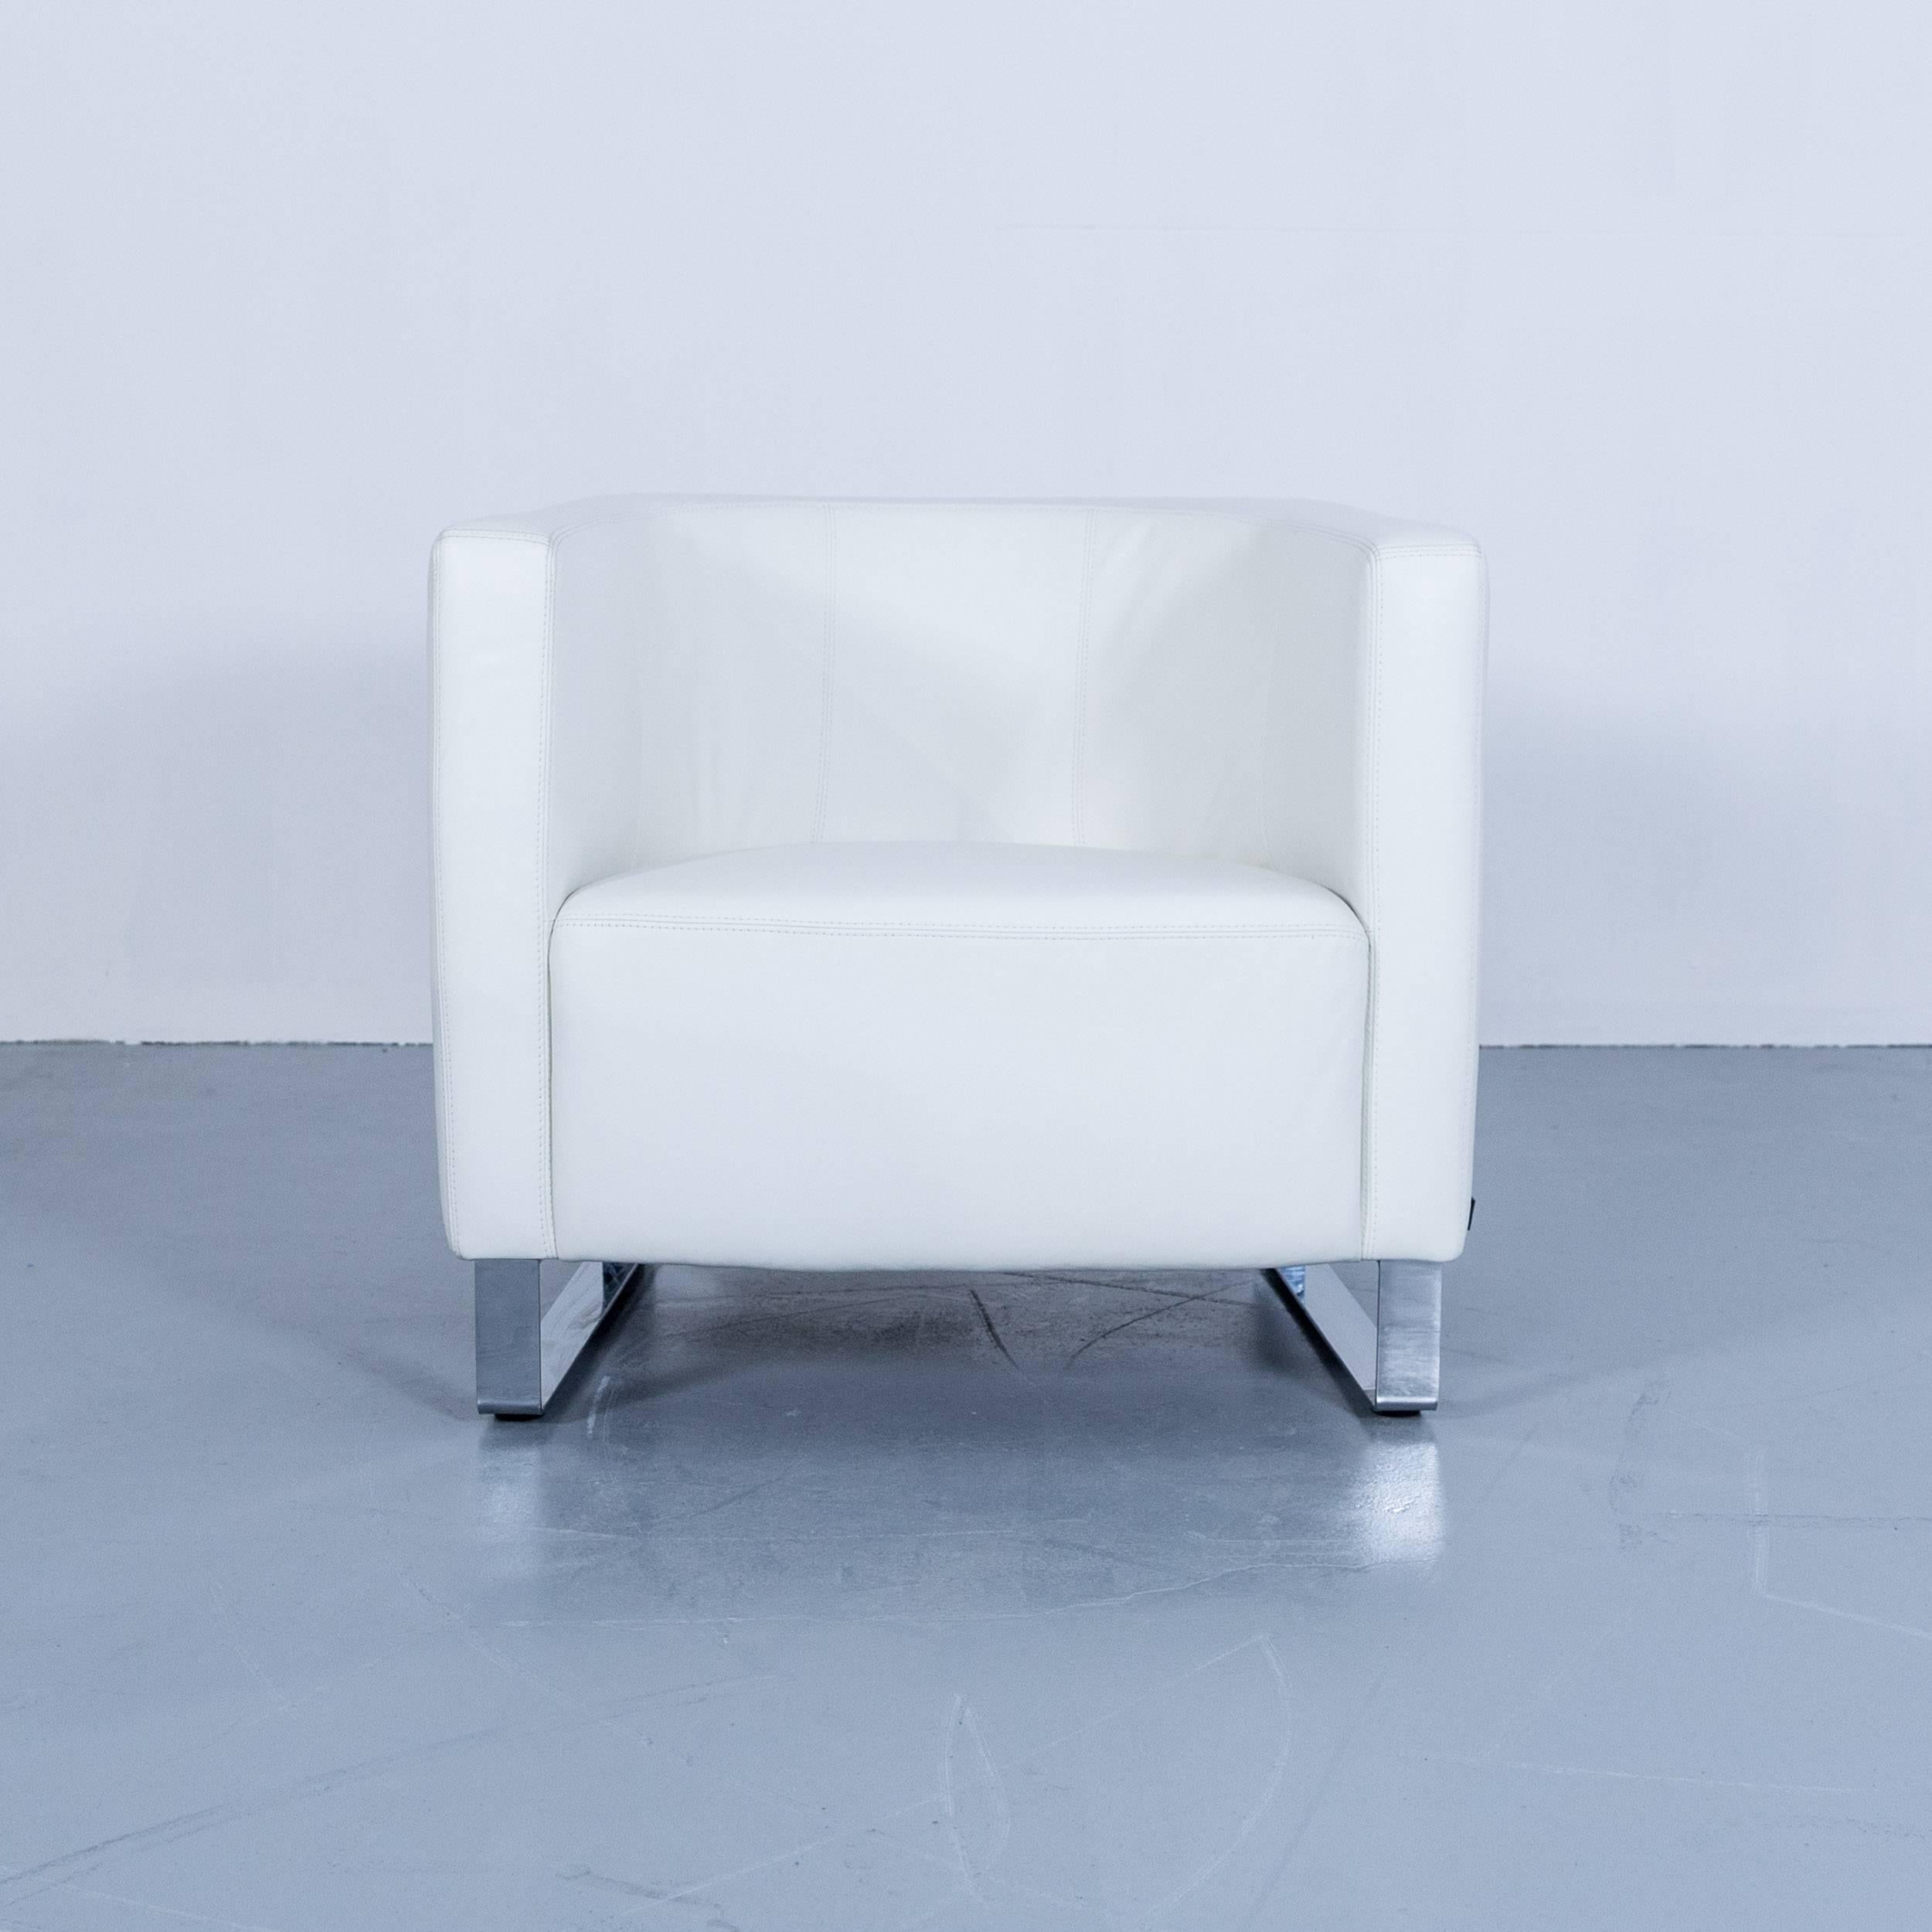 White colored, original Willi Schillig Havana armchair in a minimalistic and modern design, made for pure comfort.